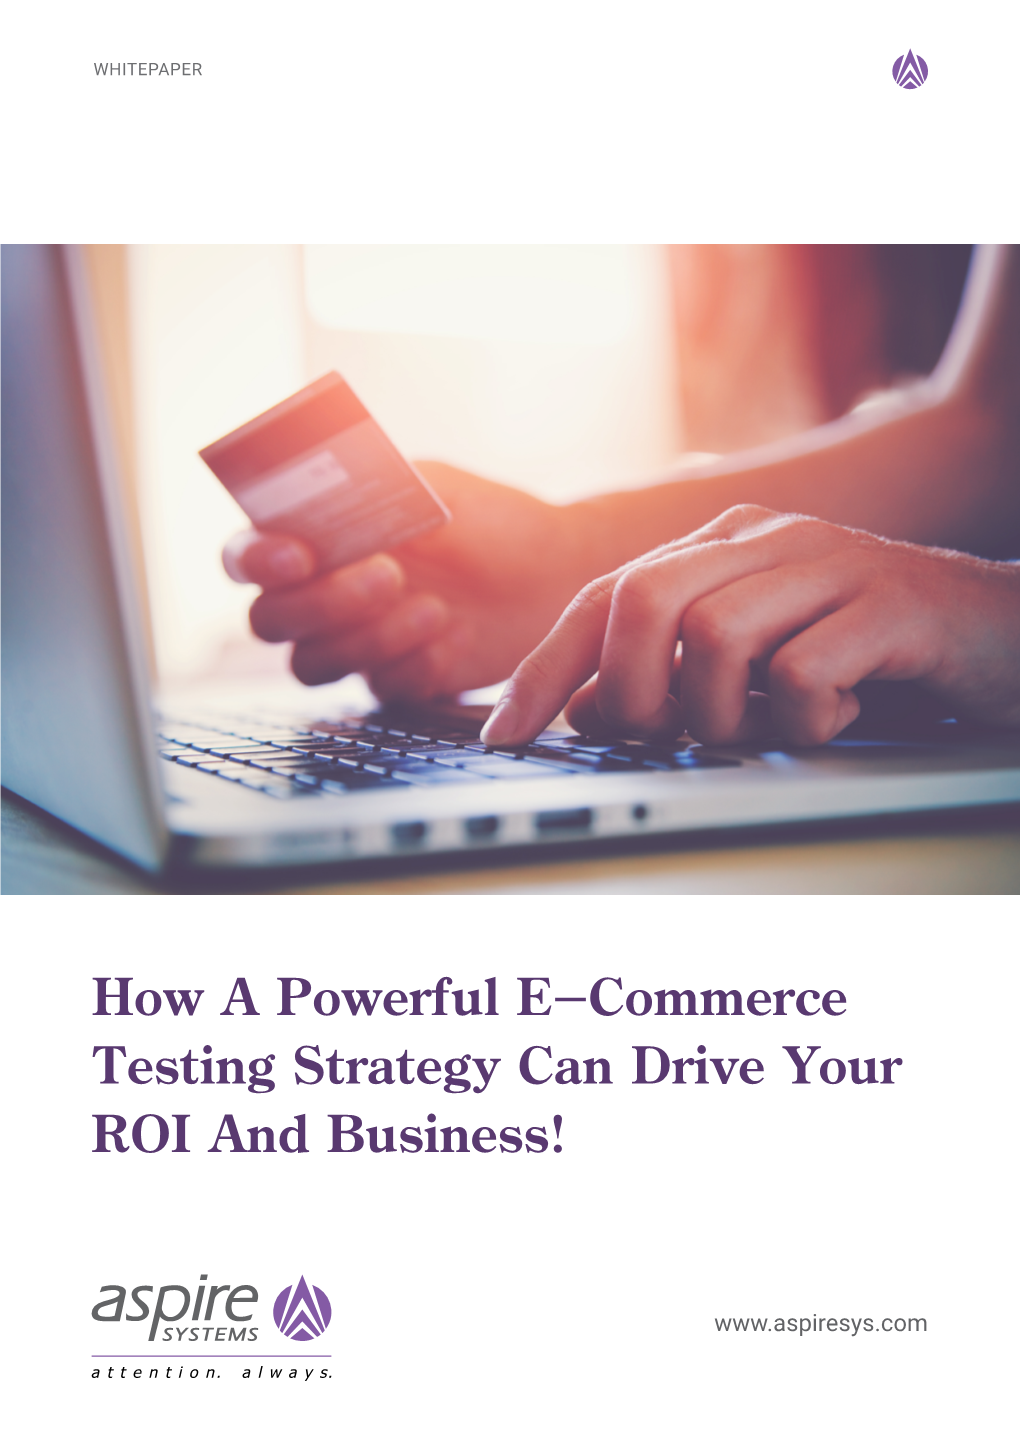 How a Powerful E-Commerce Testing Strategy Can Drive Your ROI and Business!